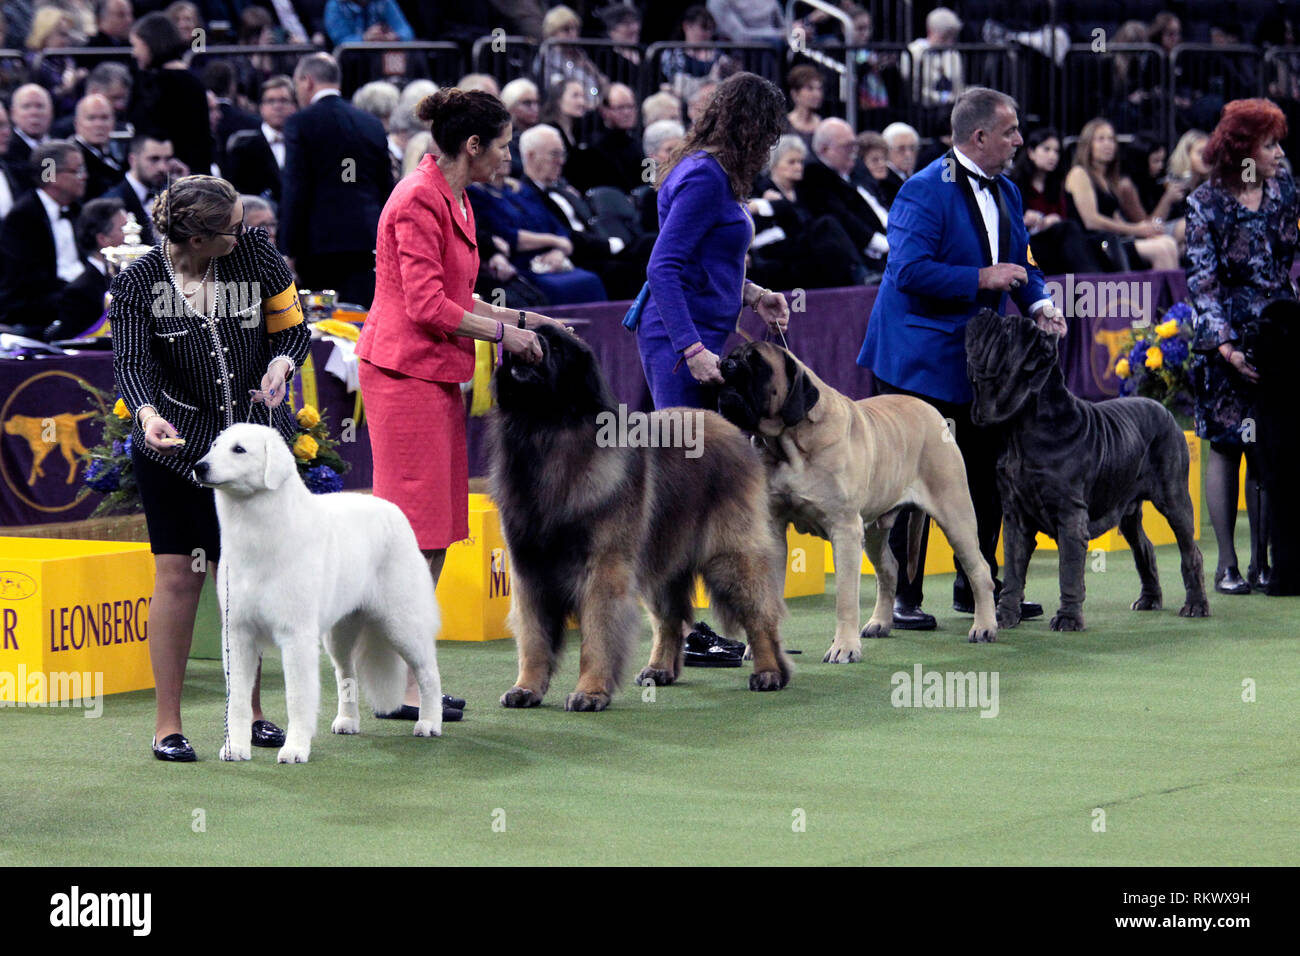 New York, USA. 12th Feb 2019. Westminster Dog Show - New York City, 12 February, 2019:  Working Group dogs awaiting judging at the 143rd Annual Westminster Dog Show, Tuesday evening at Madison Square Garden in New York City. Credit: Adam Stoltman/Alamy Live News Stock Photo